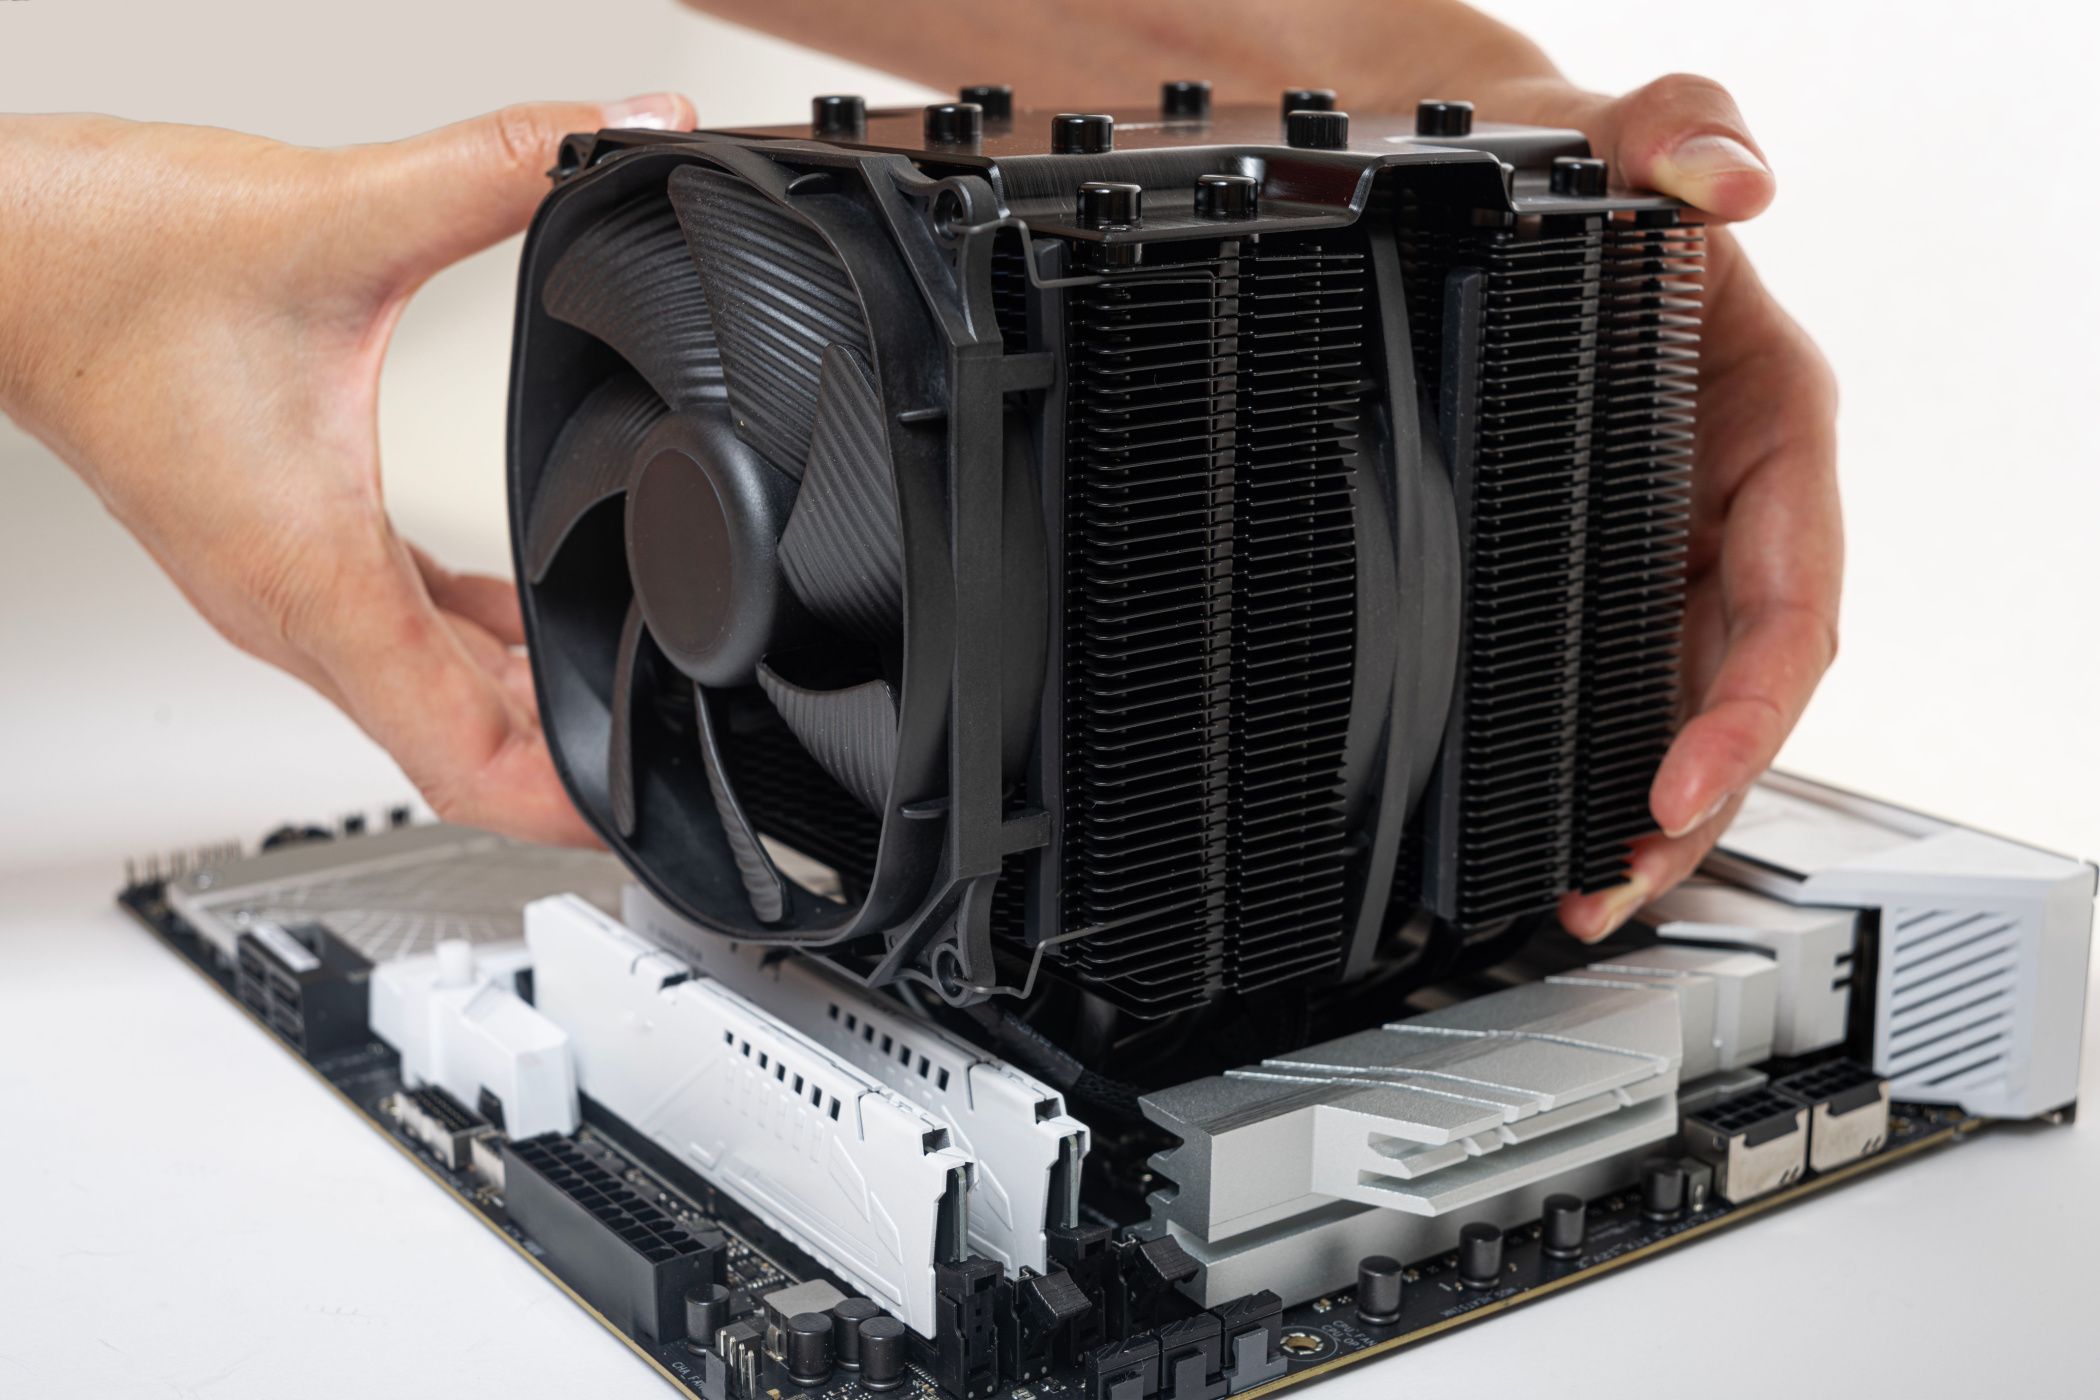 A large air CPU cooler is being installed onto a motherboard.